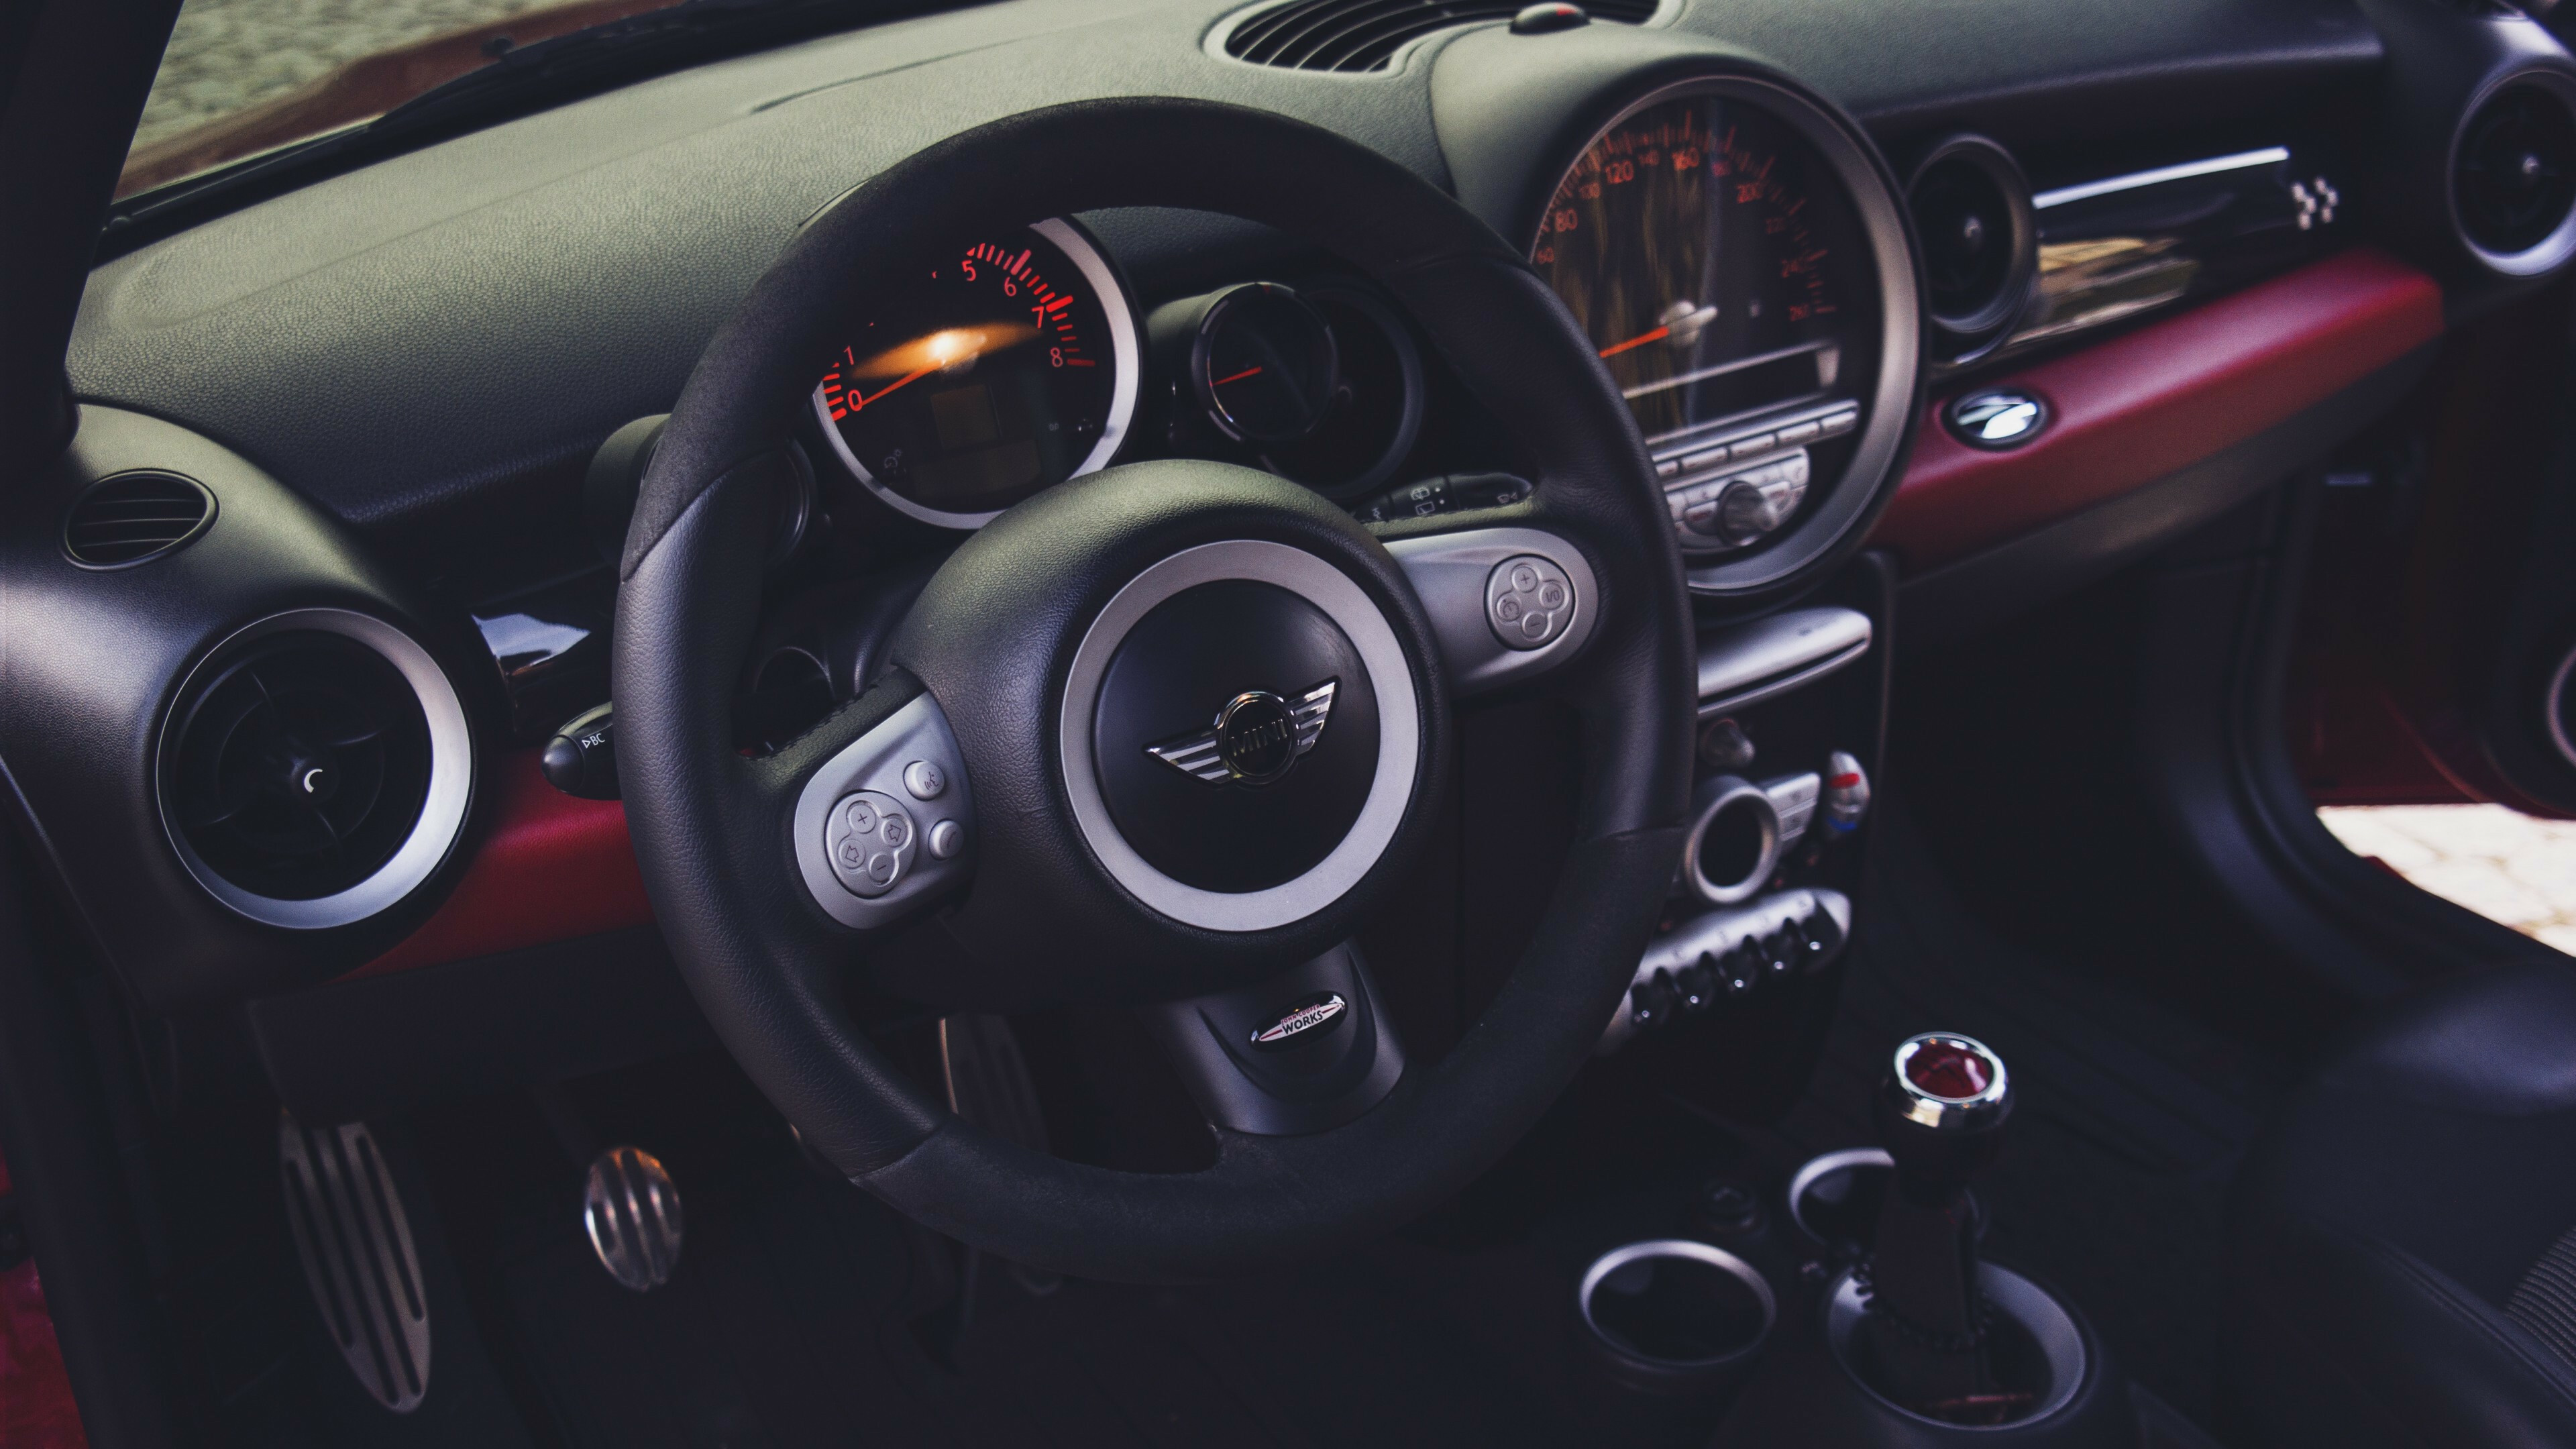 MINI Cooper: A British automotive marque founded in 1969, Cars, Interior. 3840x2160 4K Background.